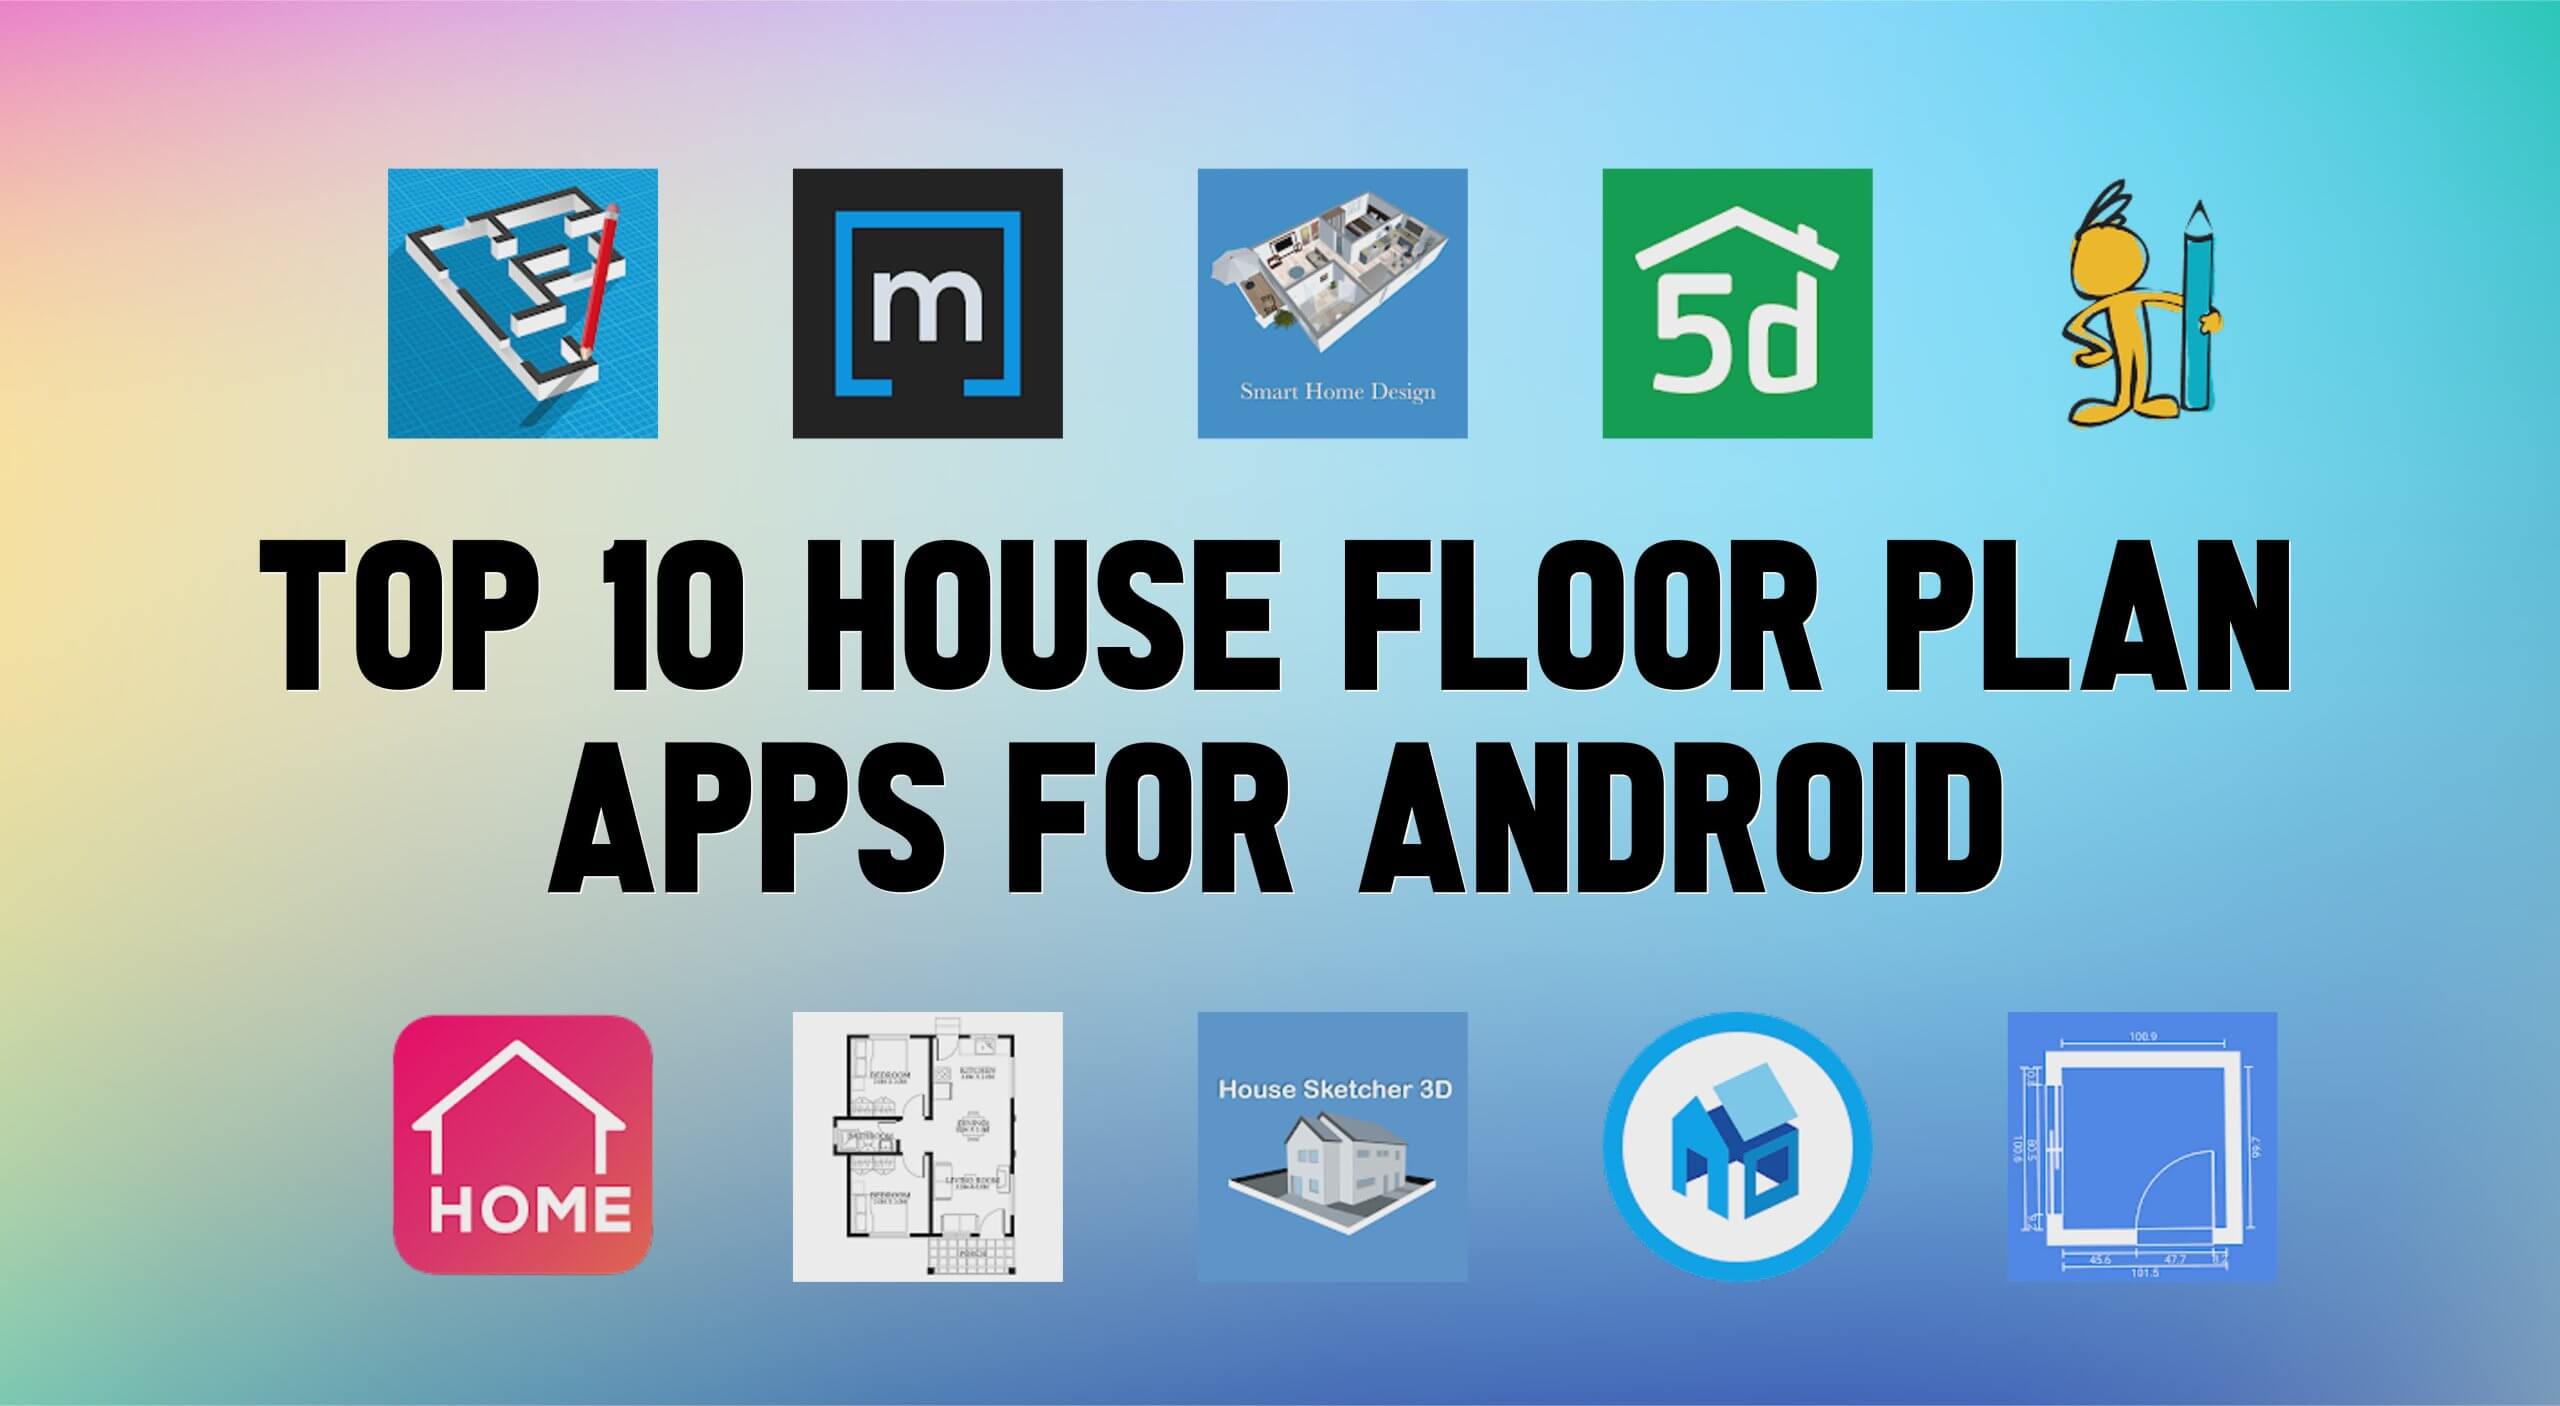 Best House Floor Plan Apps For Android